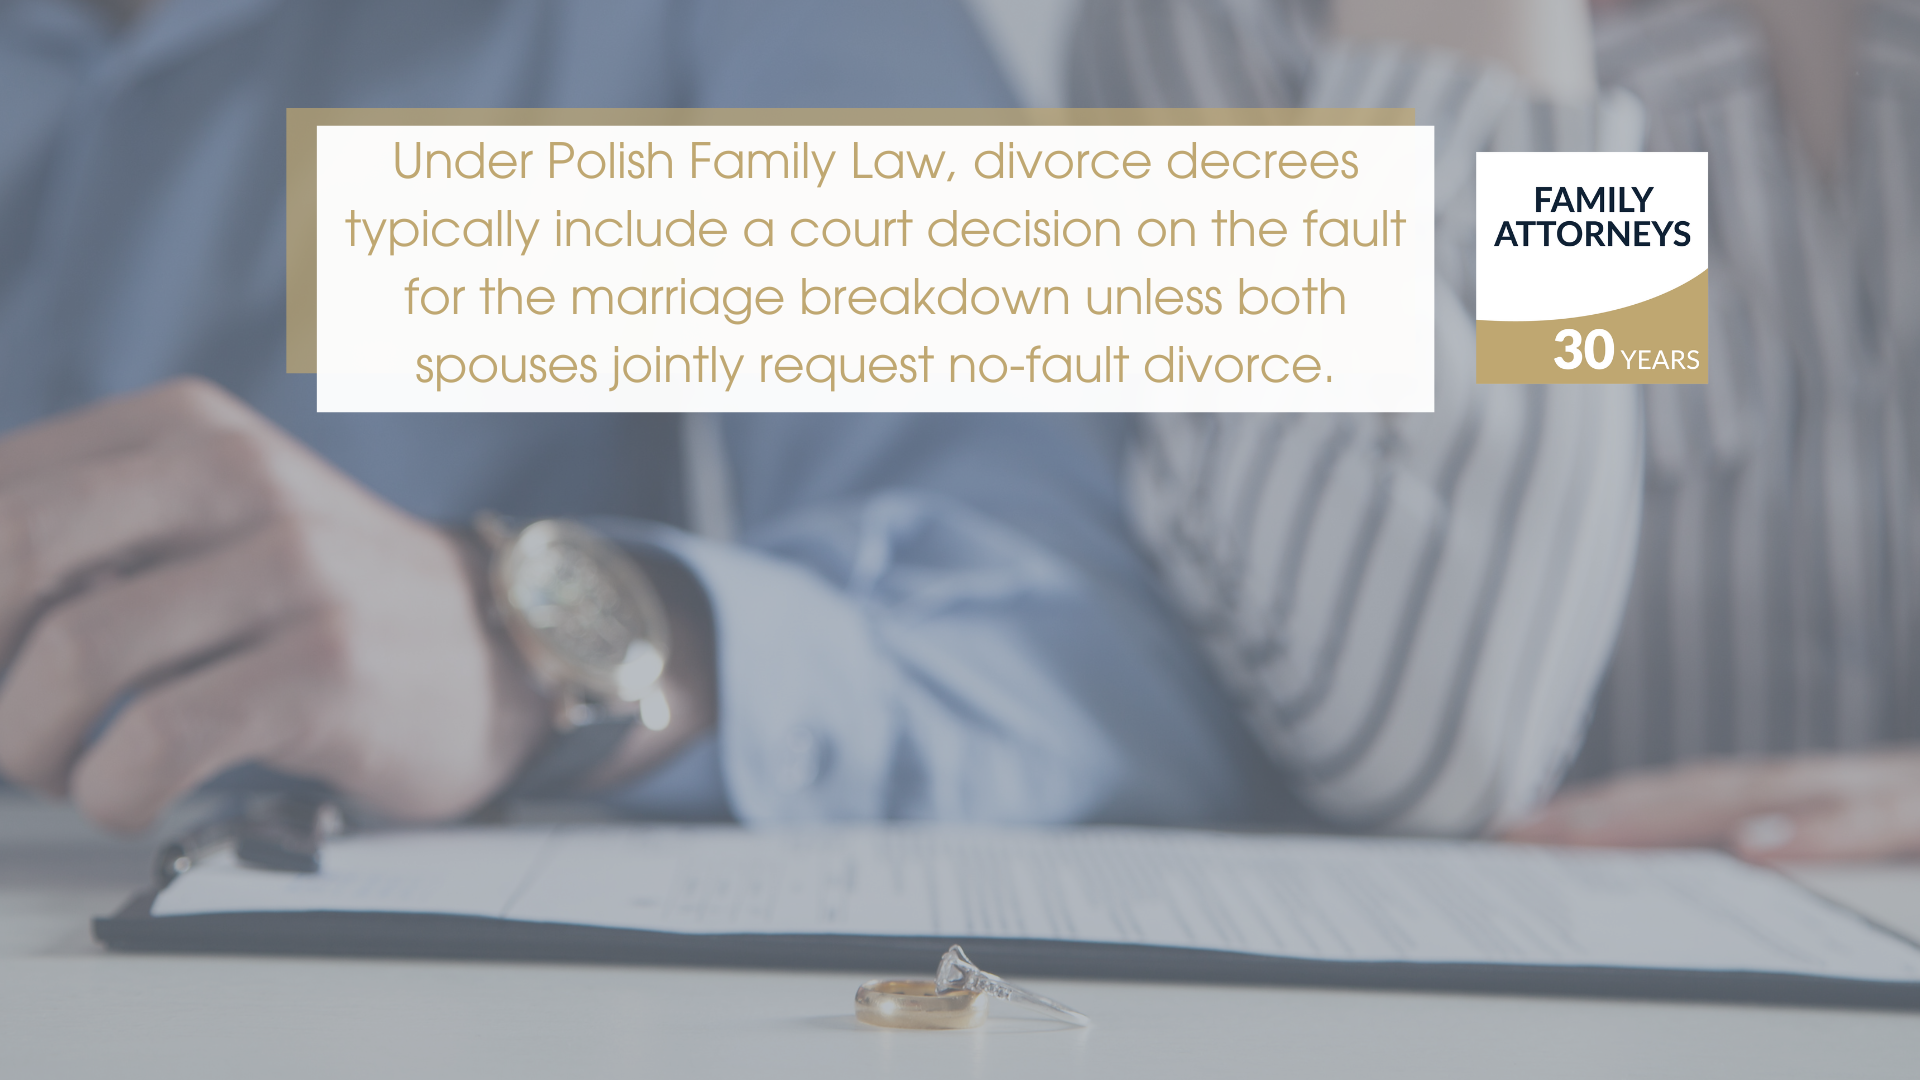 Under Polish Family Law, divorce decrees typically include a court decision on the fault for the marriage breakdown unless both spouses jointly request no-fault divorce.